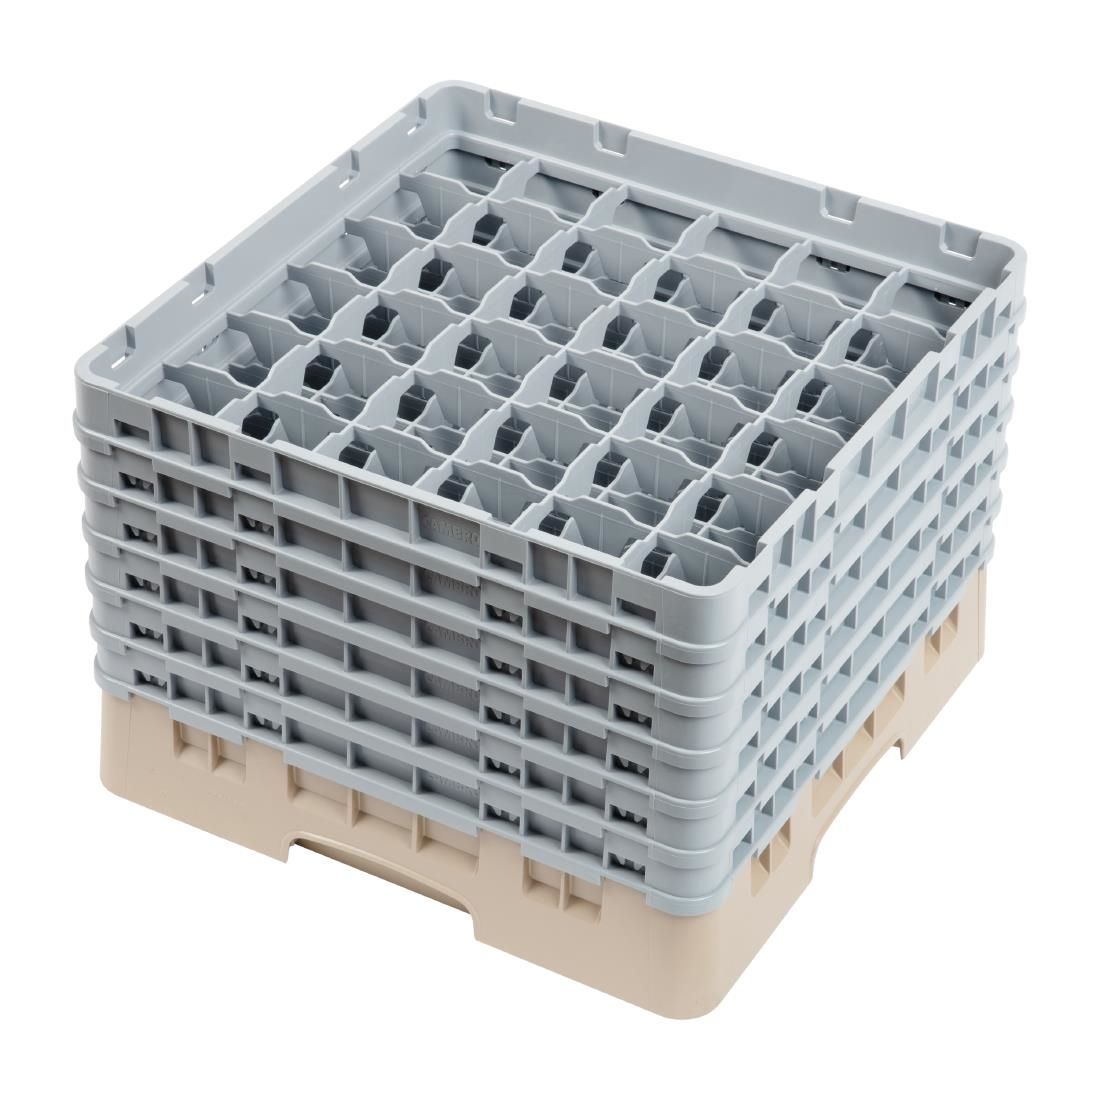 Cambro Camrack Beige 36 Compartments Max Glass Height 298mm JD Catering Equipment Solutions Ltd